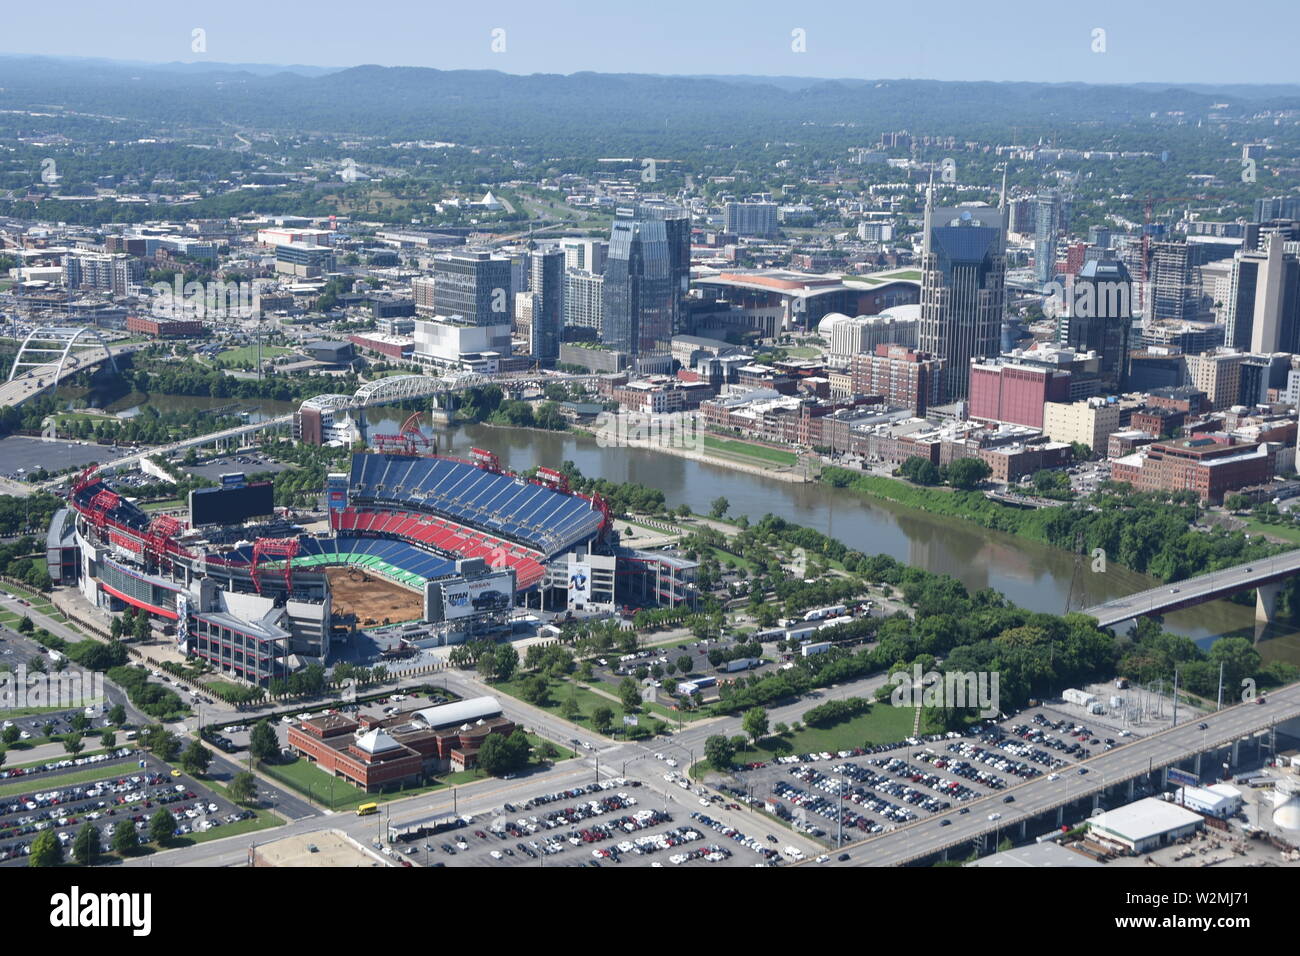 A photo of downtown Nashville, Tennessee taken from the air June 21, 2019. Members of the Tennessee Army National Guard’s 1-230th Assault Helicopter Battalion took several members from the Tennessee Air National Guard’s 118th Wing for a flight on a UH-60 Black Hawk around Nashville and the surrounding counties. (U.S. Air National Guard photo by Staff Sgt. Anthony Agosti) Stock Photo